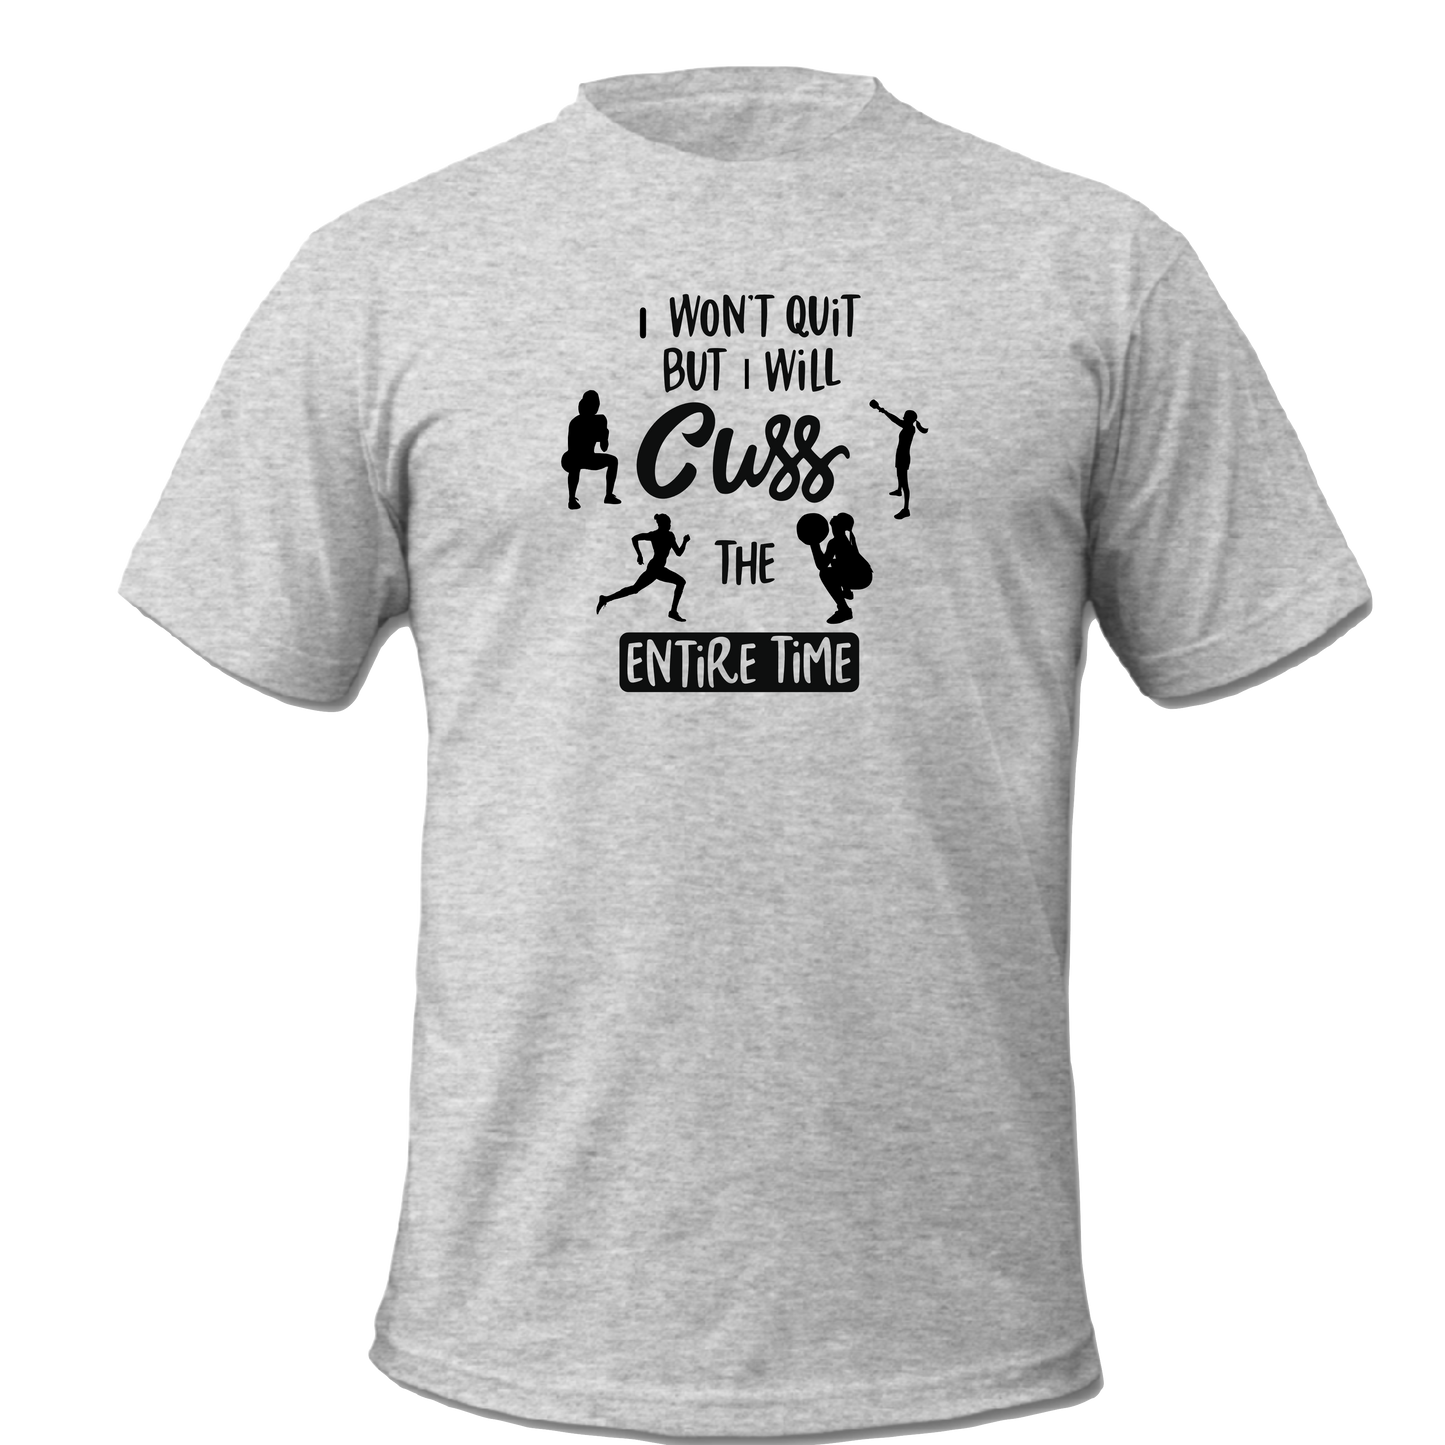 ' I Won't Quit But I Will Cuss the Entire Time' Adult  T-Shirt